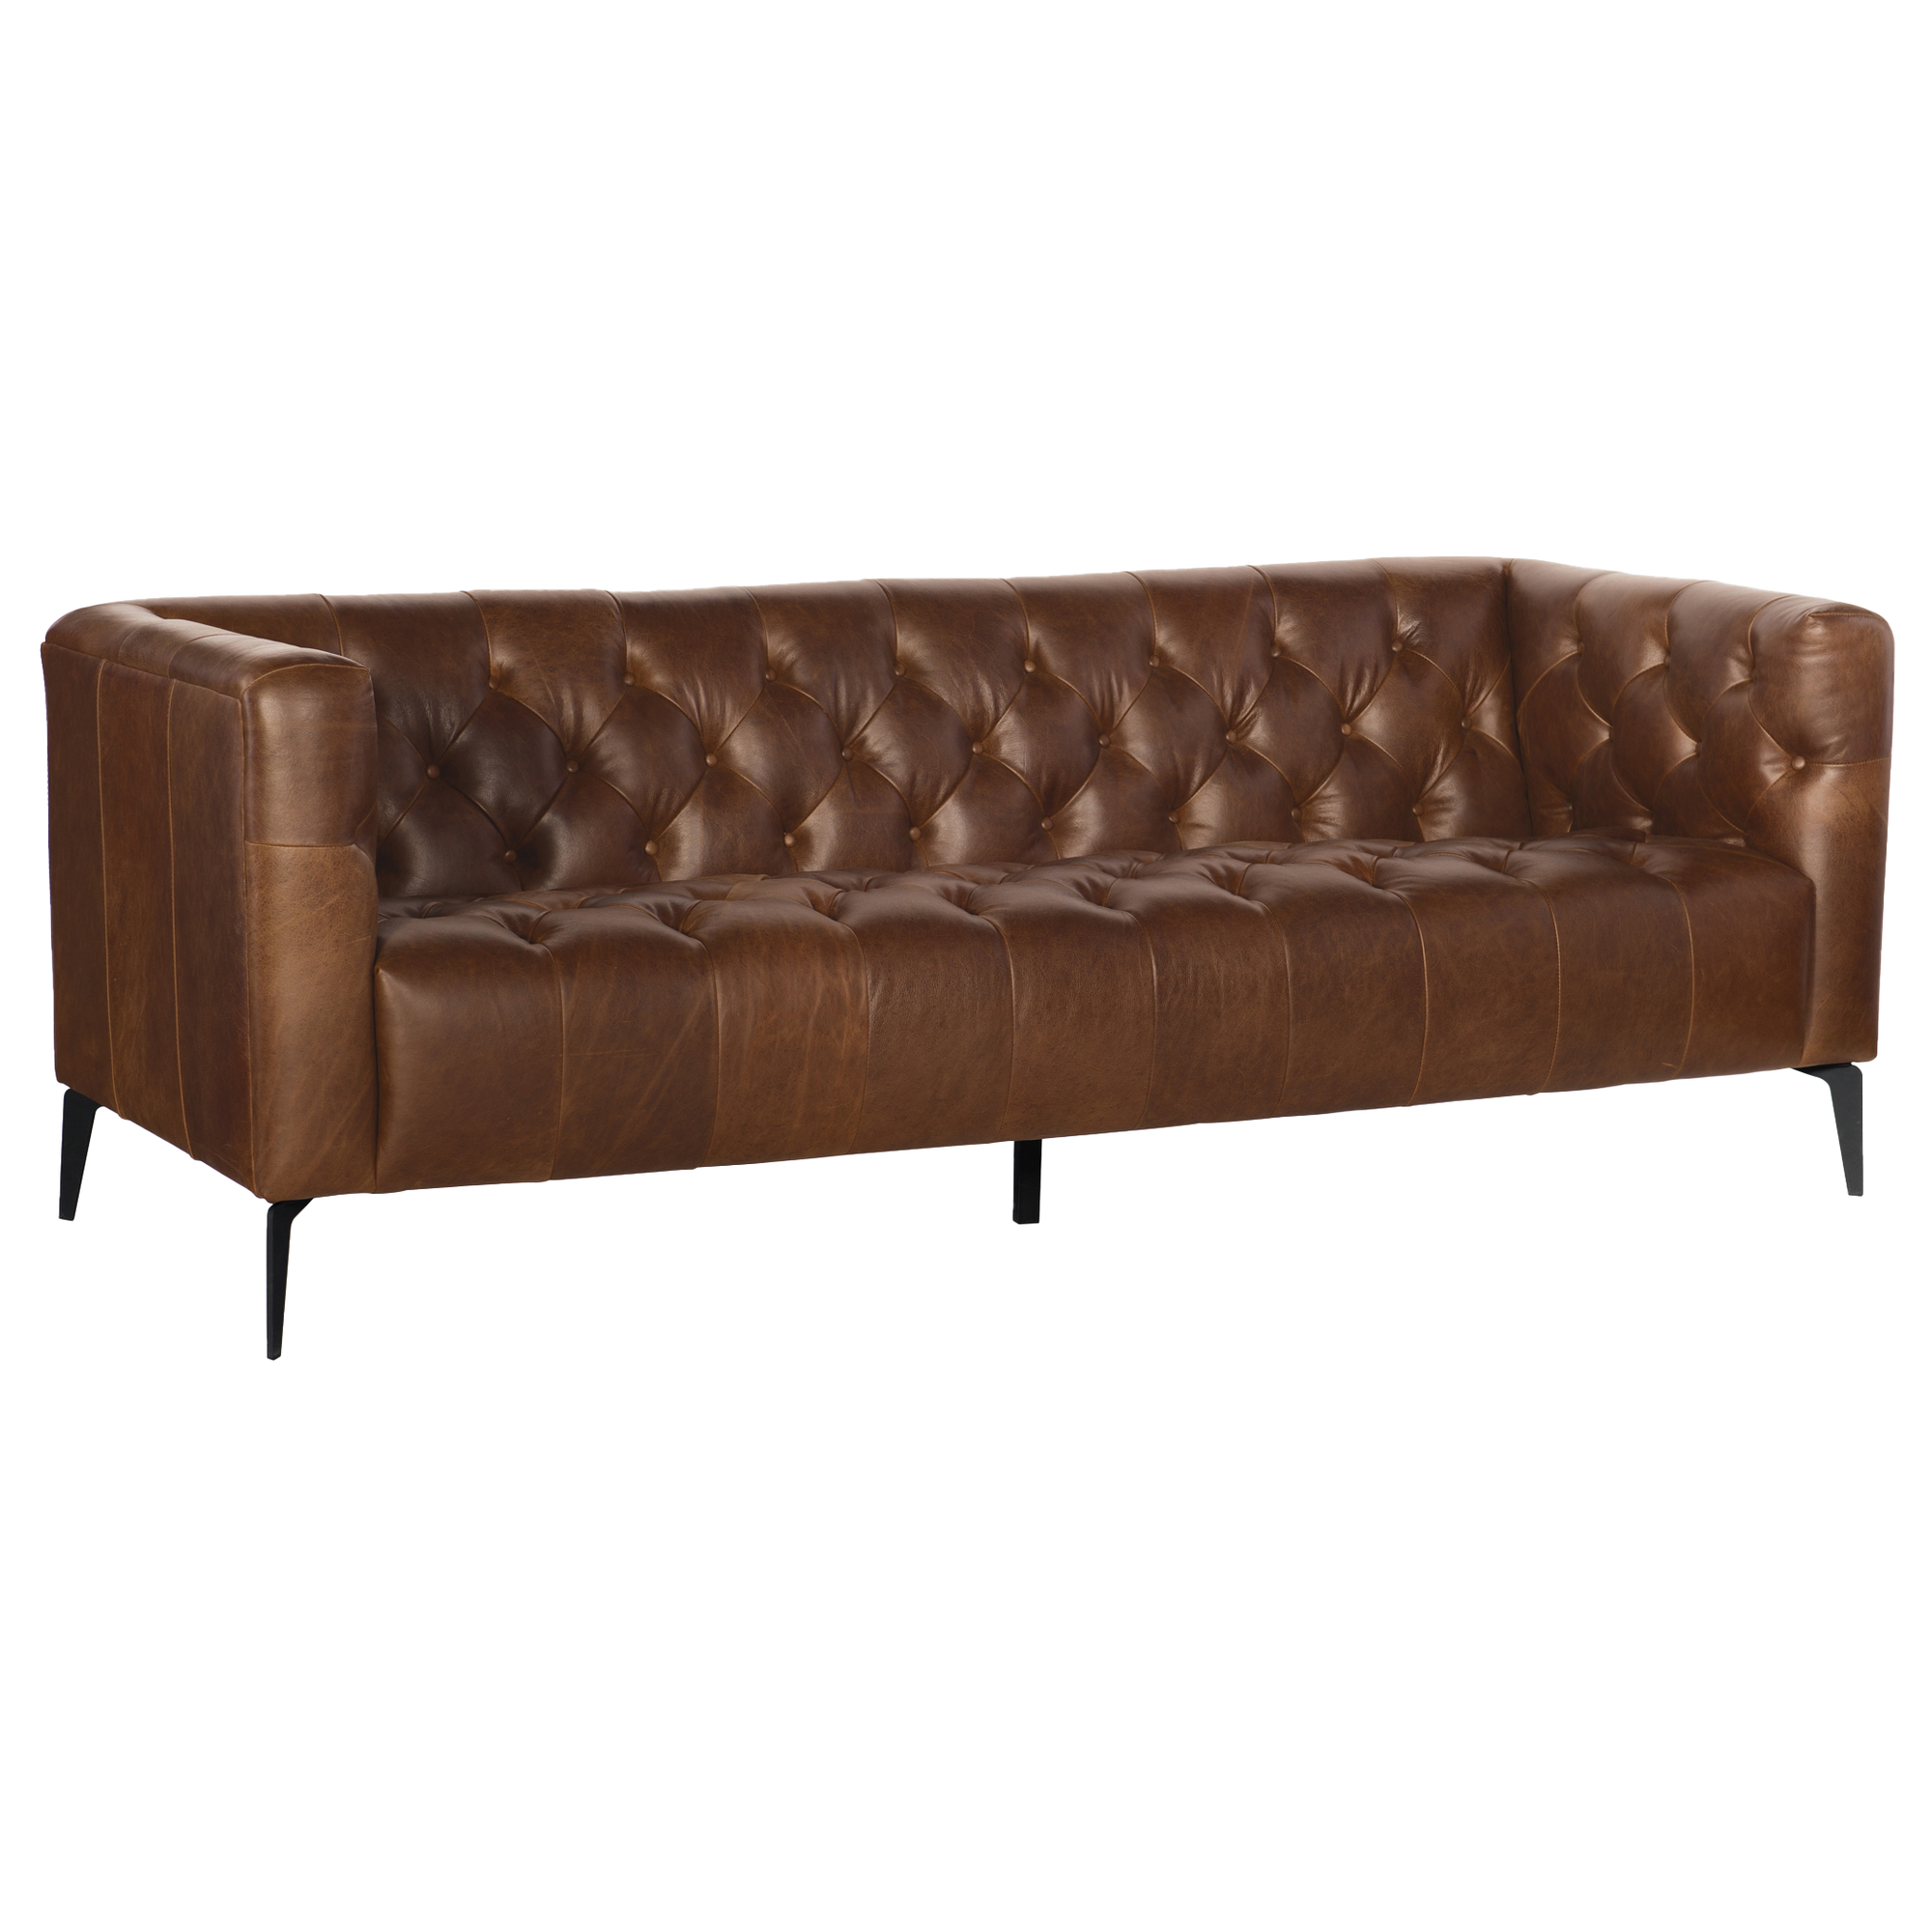 Nonie 84" Wide Upholstered Leather Sofa, Brown